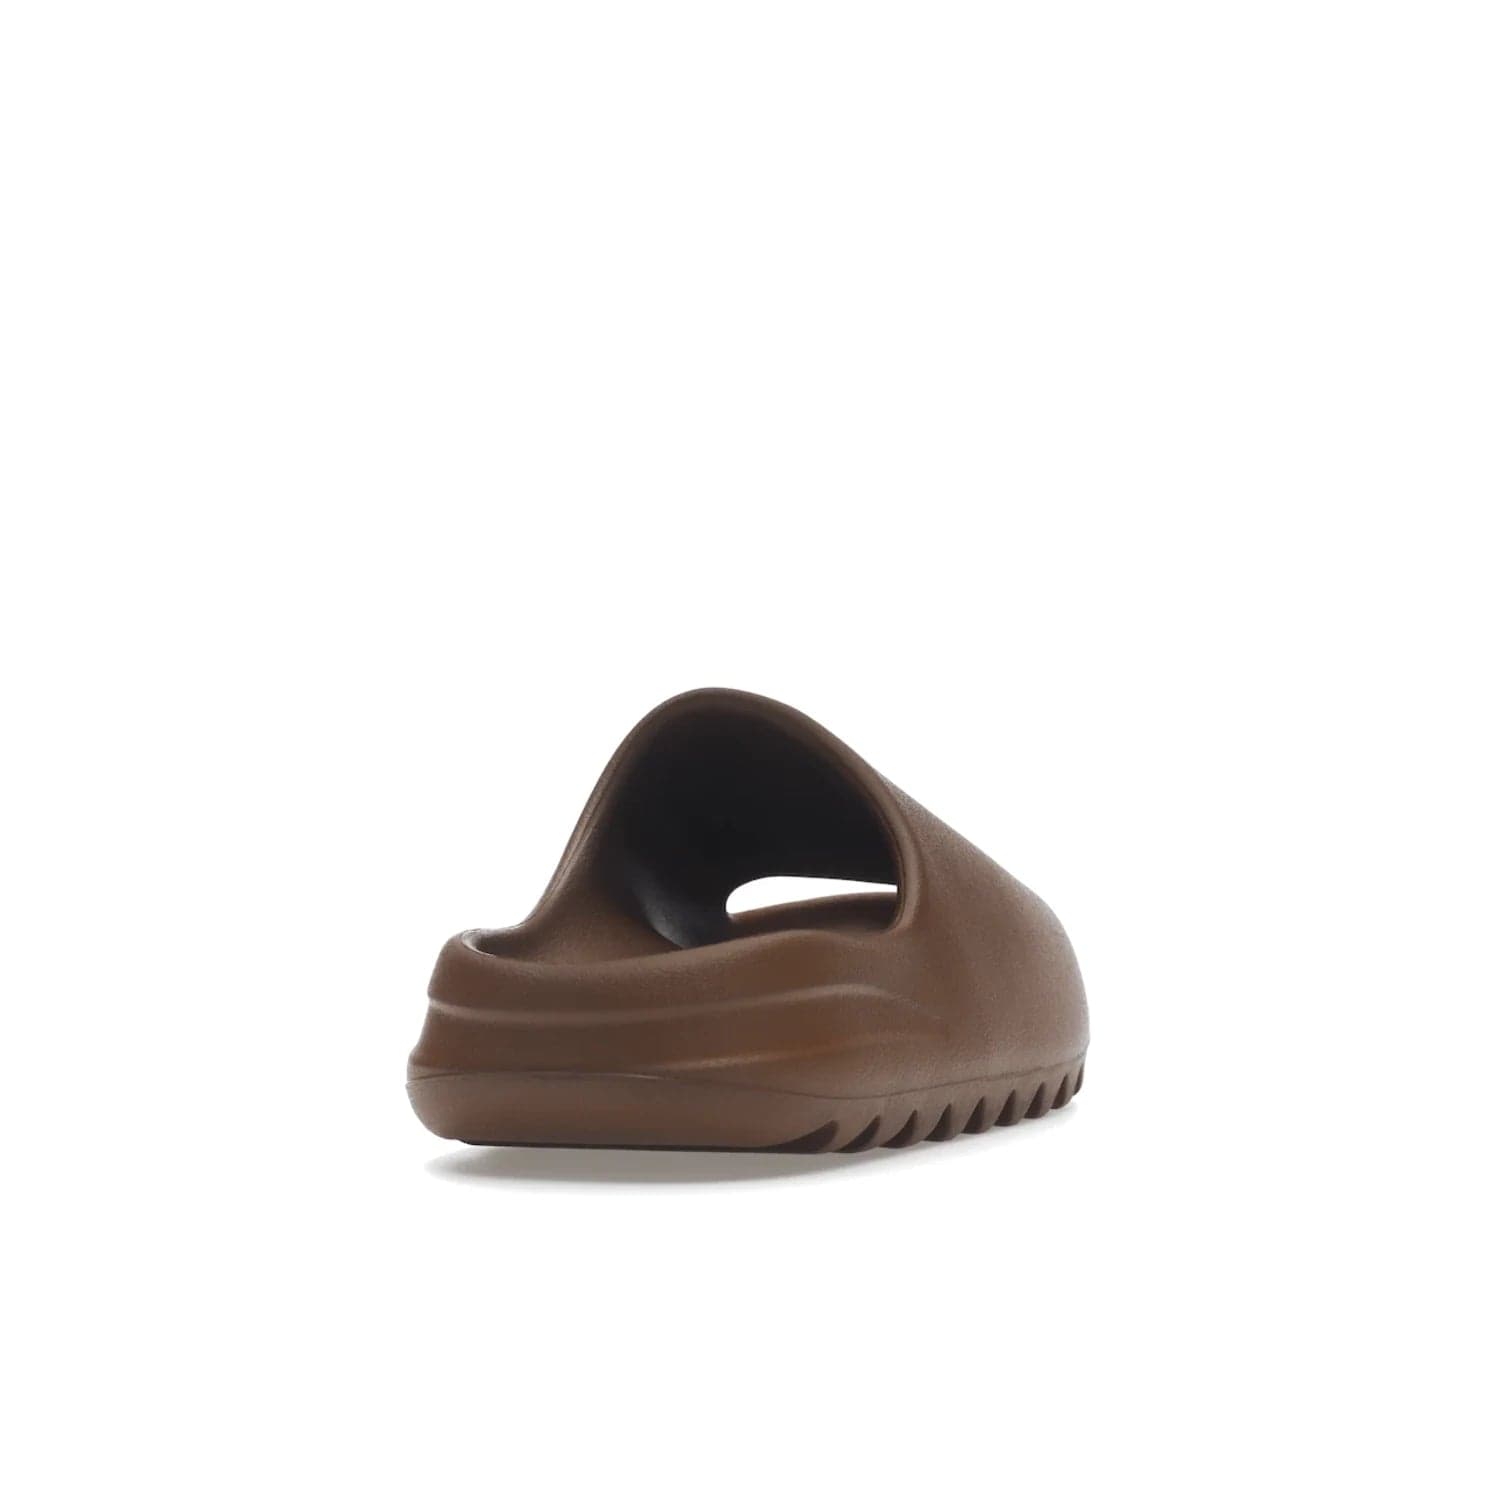 adidas Yeezy Slide Flax - Image 30 - Only at www.BallersClubKickz.com - Score the perfect casual look with the adidas Yeezy Slide Flax. Made with lightweight injected EVA plus horizontal grooves underfoot for traction. Release on August 22, 2022. $70.